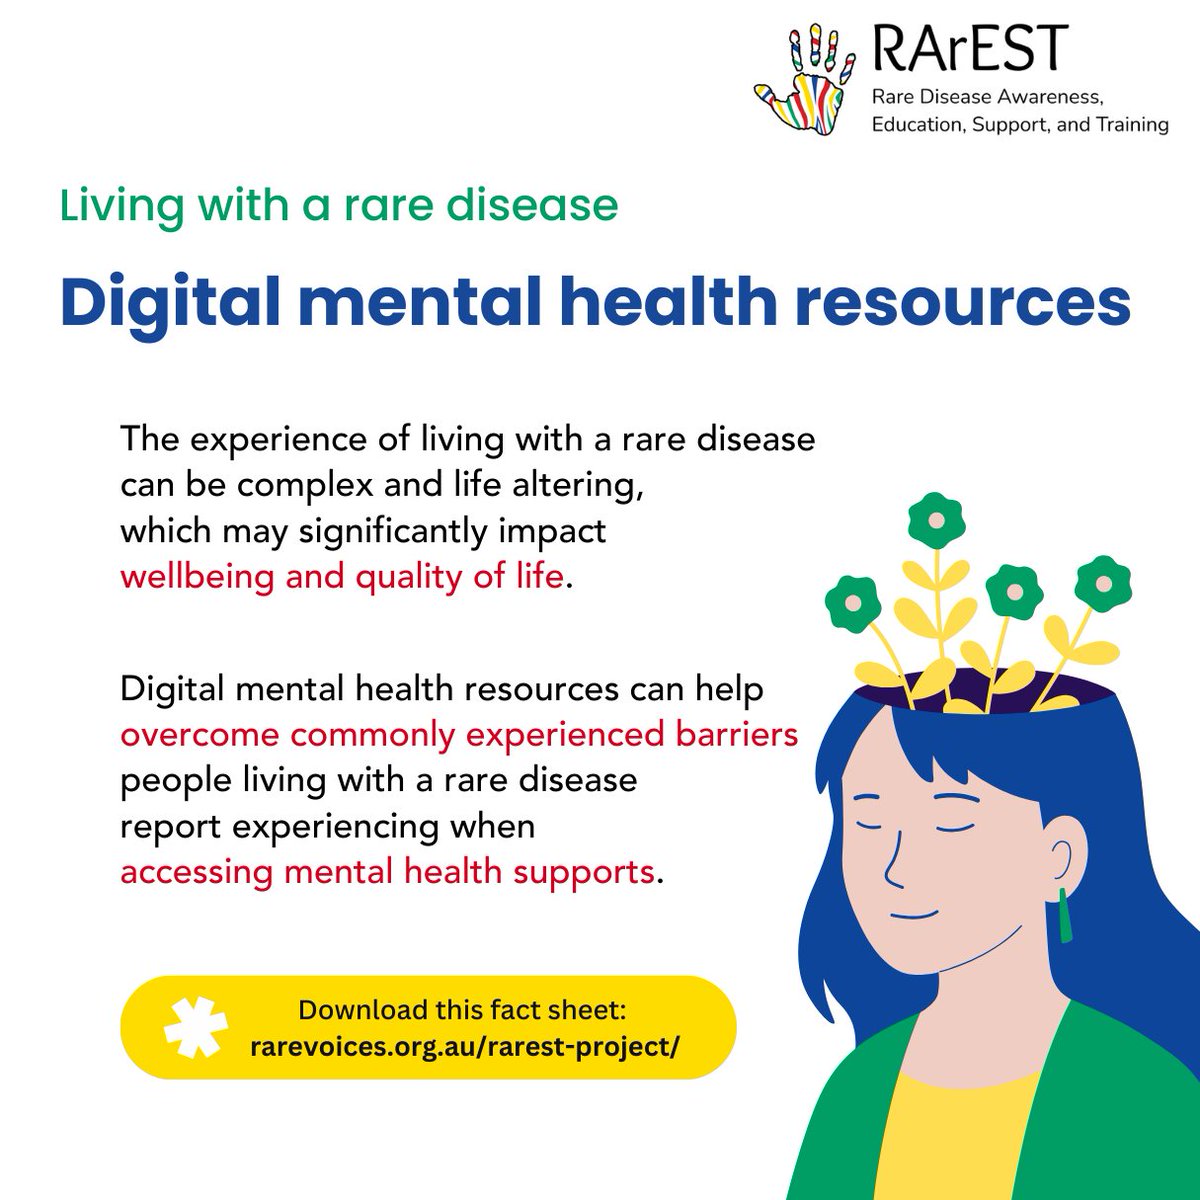 'Digital Mental Health Resources Fact Sheet' tailored for Australians living with rare diseases, their families, and caregivers. You can find credible information about digital mental health and services. Download now: rarevoices.org.au/rarest-project/